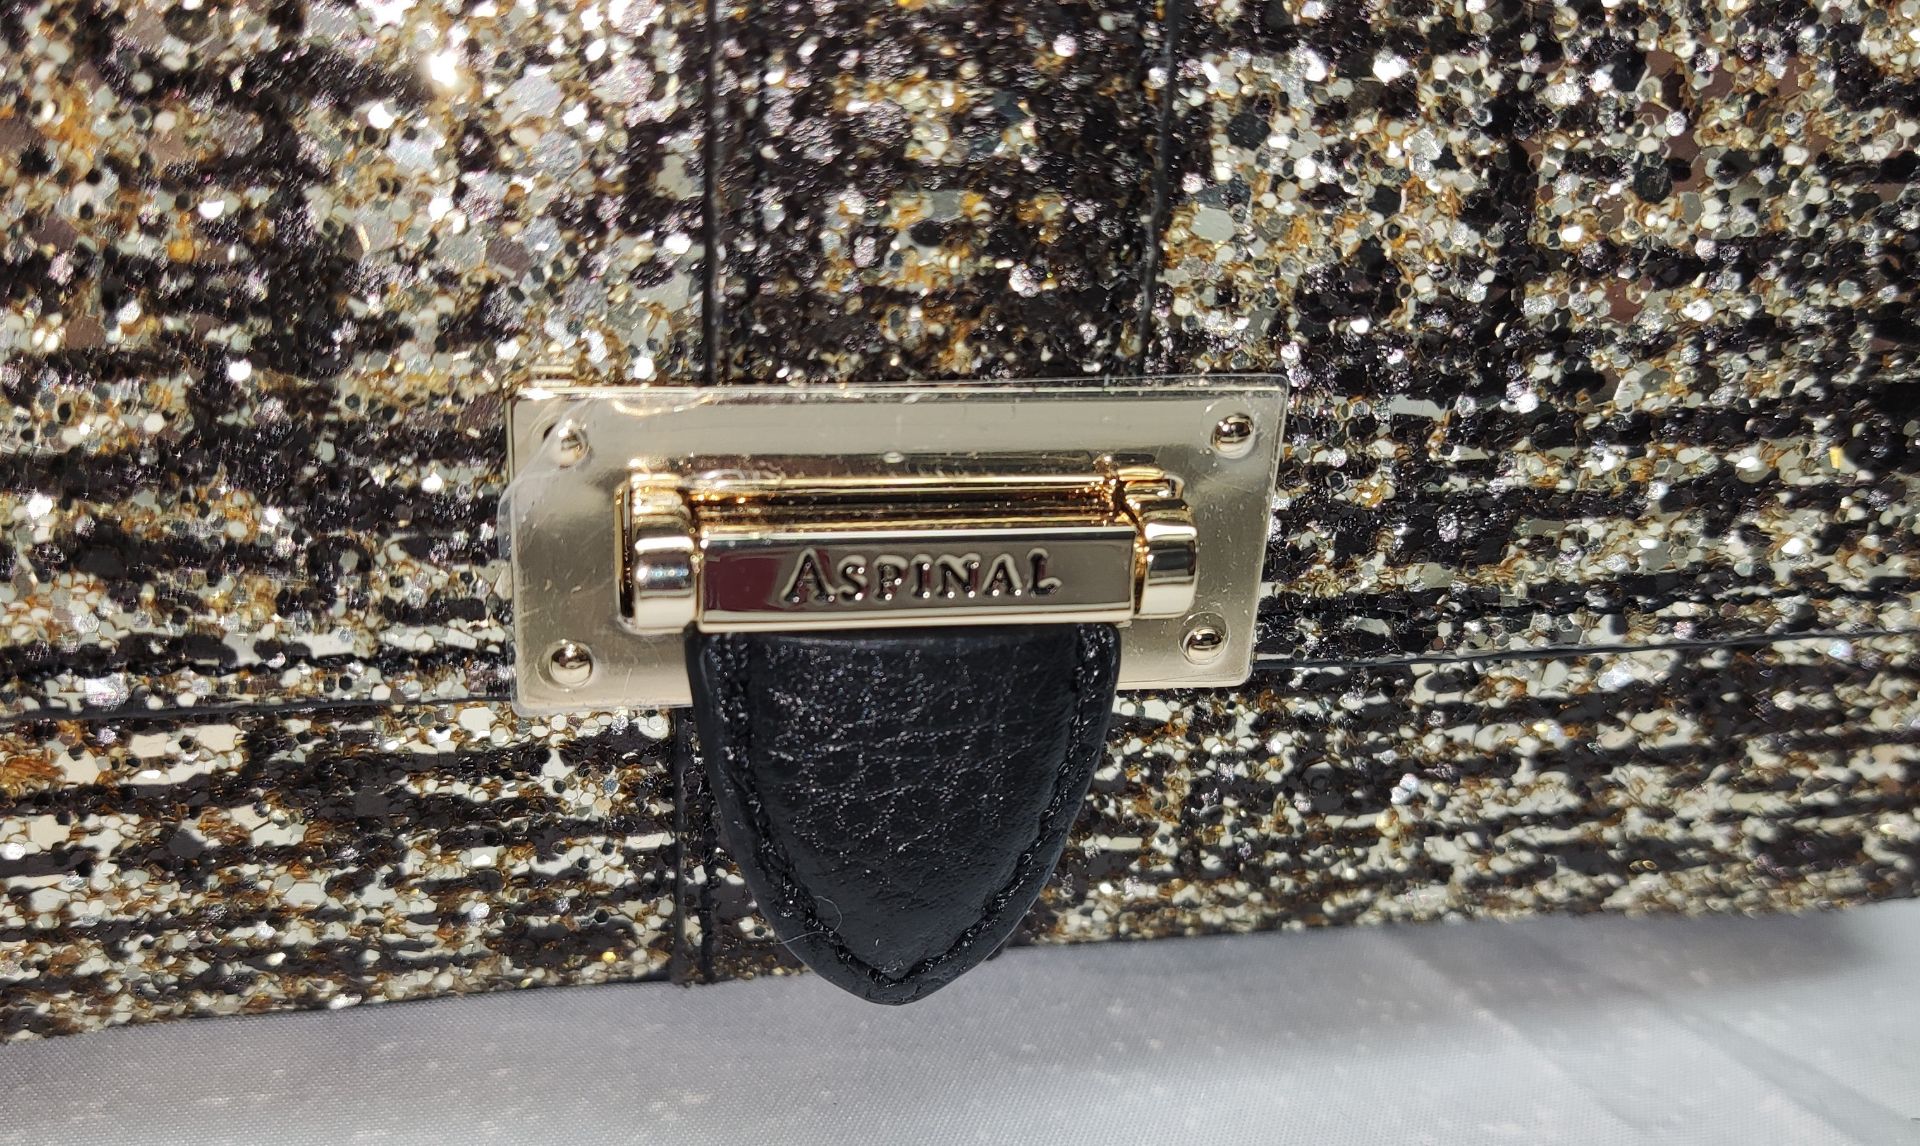 1 x ASPINAL OF LONDON Lottie Bag With Glitter Finish - Boxed - Original RRP £595 - Ref: 7268436/ - Image 6 of 16